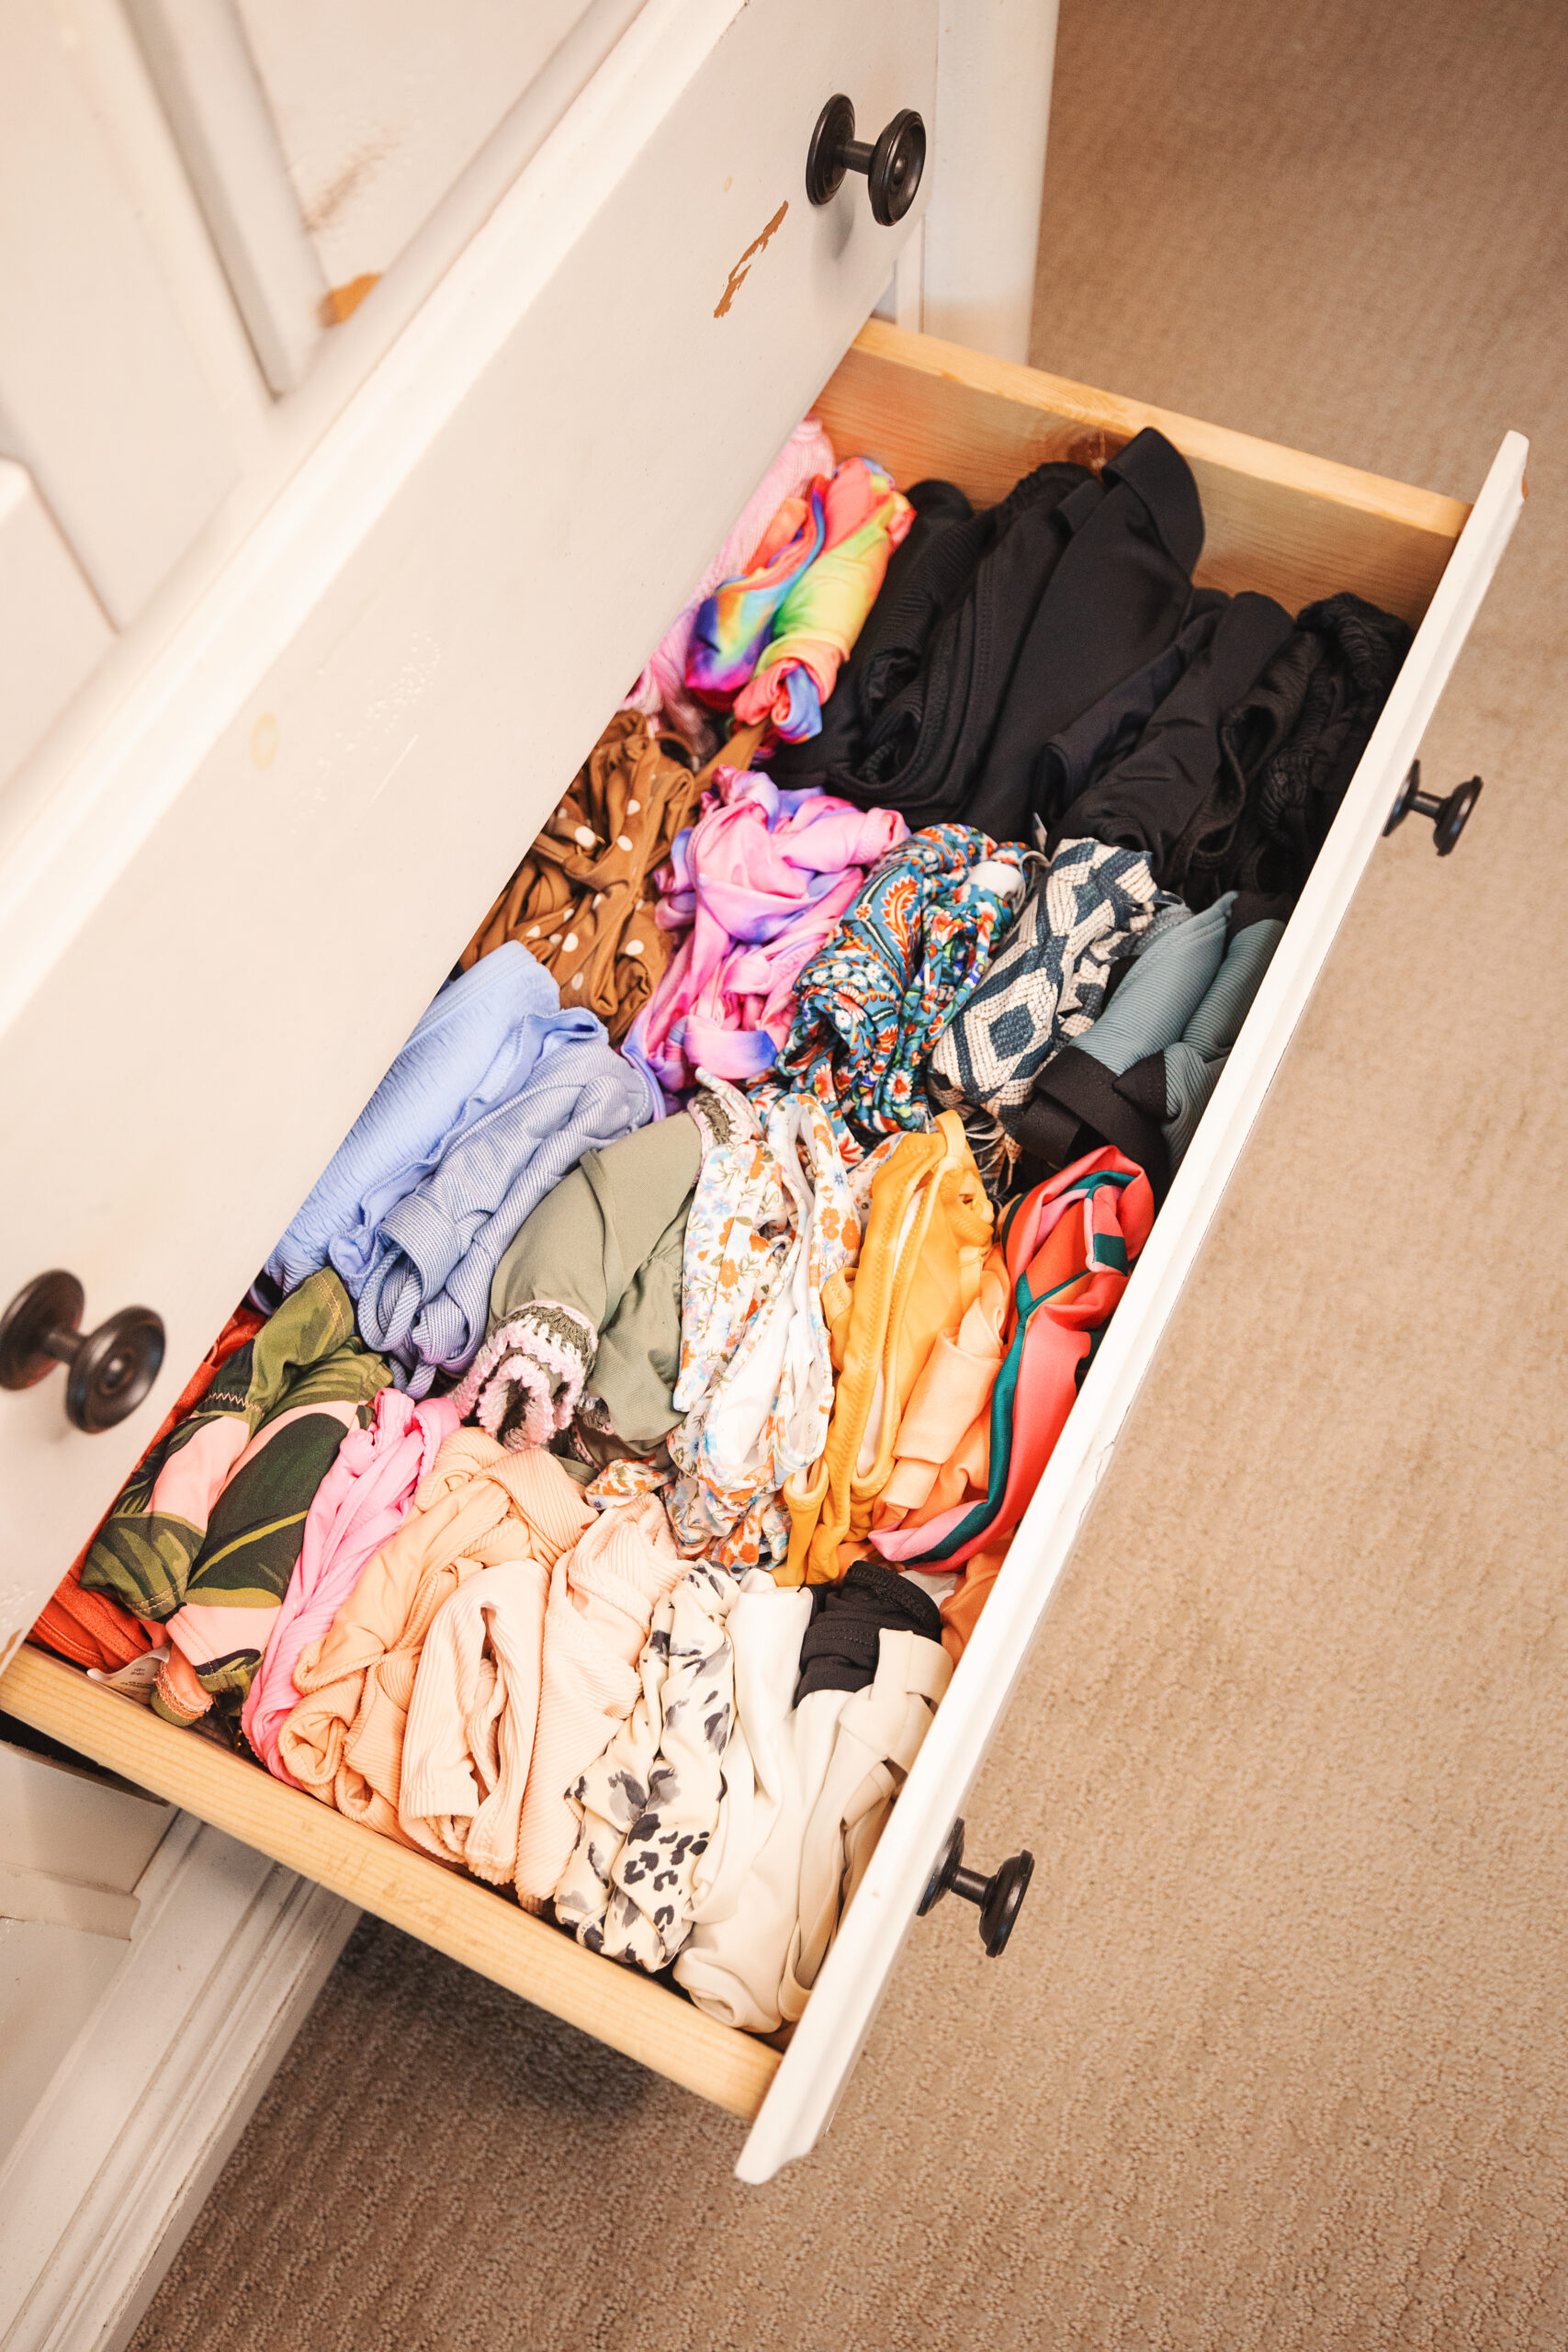 organizing, decluttering, organization, tips for organizing, closet organization, small space hacks, small space tips, organization products, apartment living, apartment hacks, closet organization ideas, closet designs, closet organization ideas small, storage solutions, small spaces